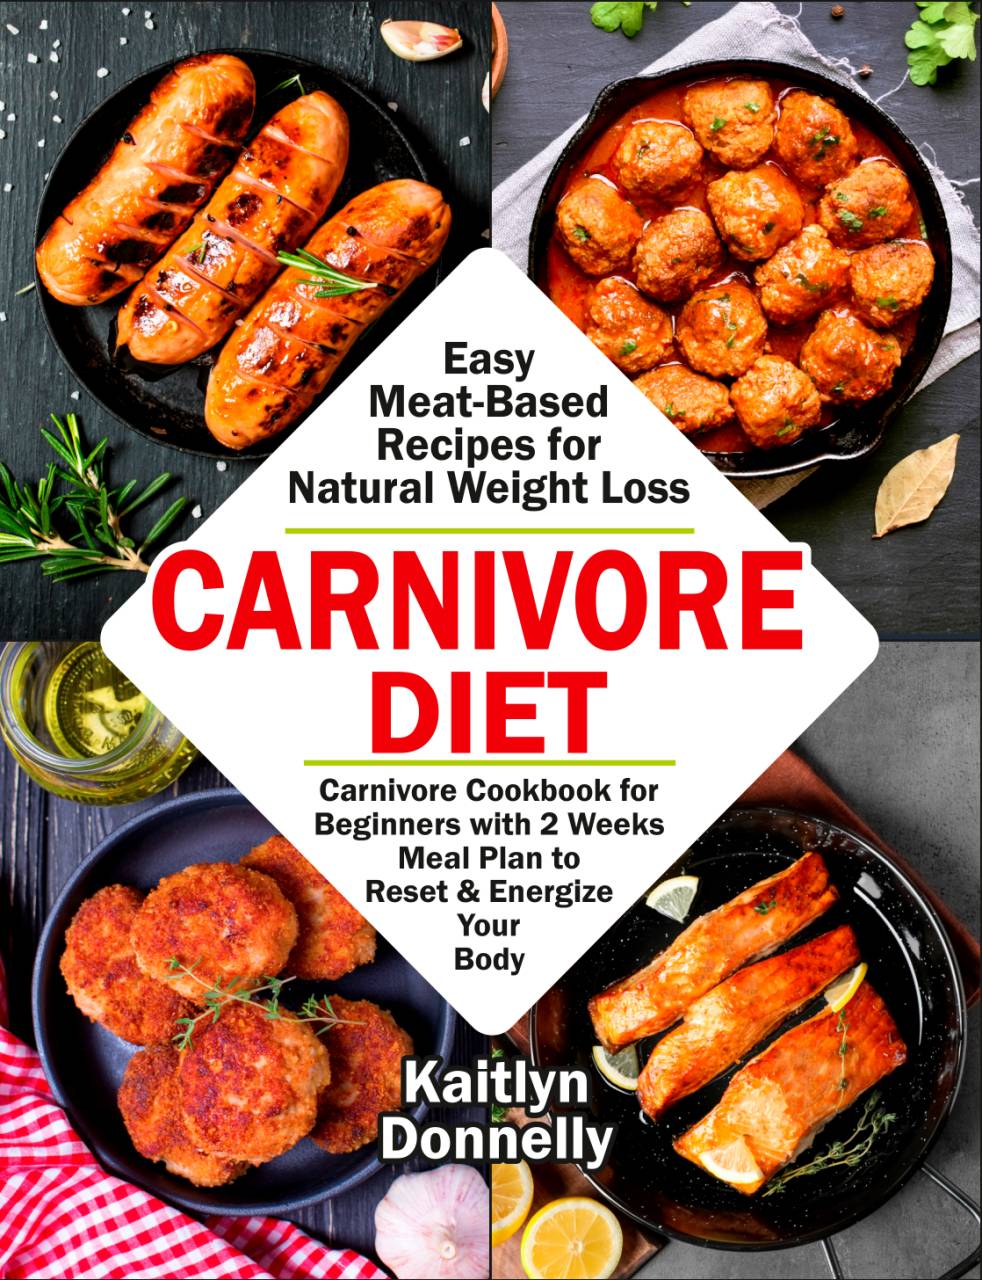 FREE: Carnivore Diet: Easy Meat Based Recipes for Natural Weight Loss. by Kaitlyn Donnelly